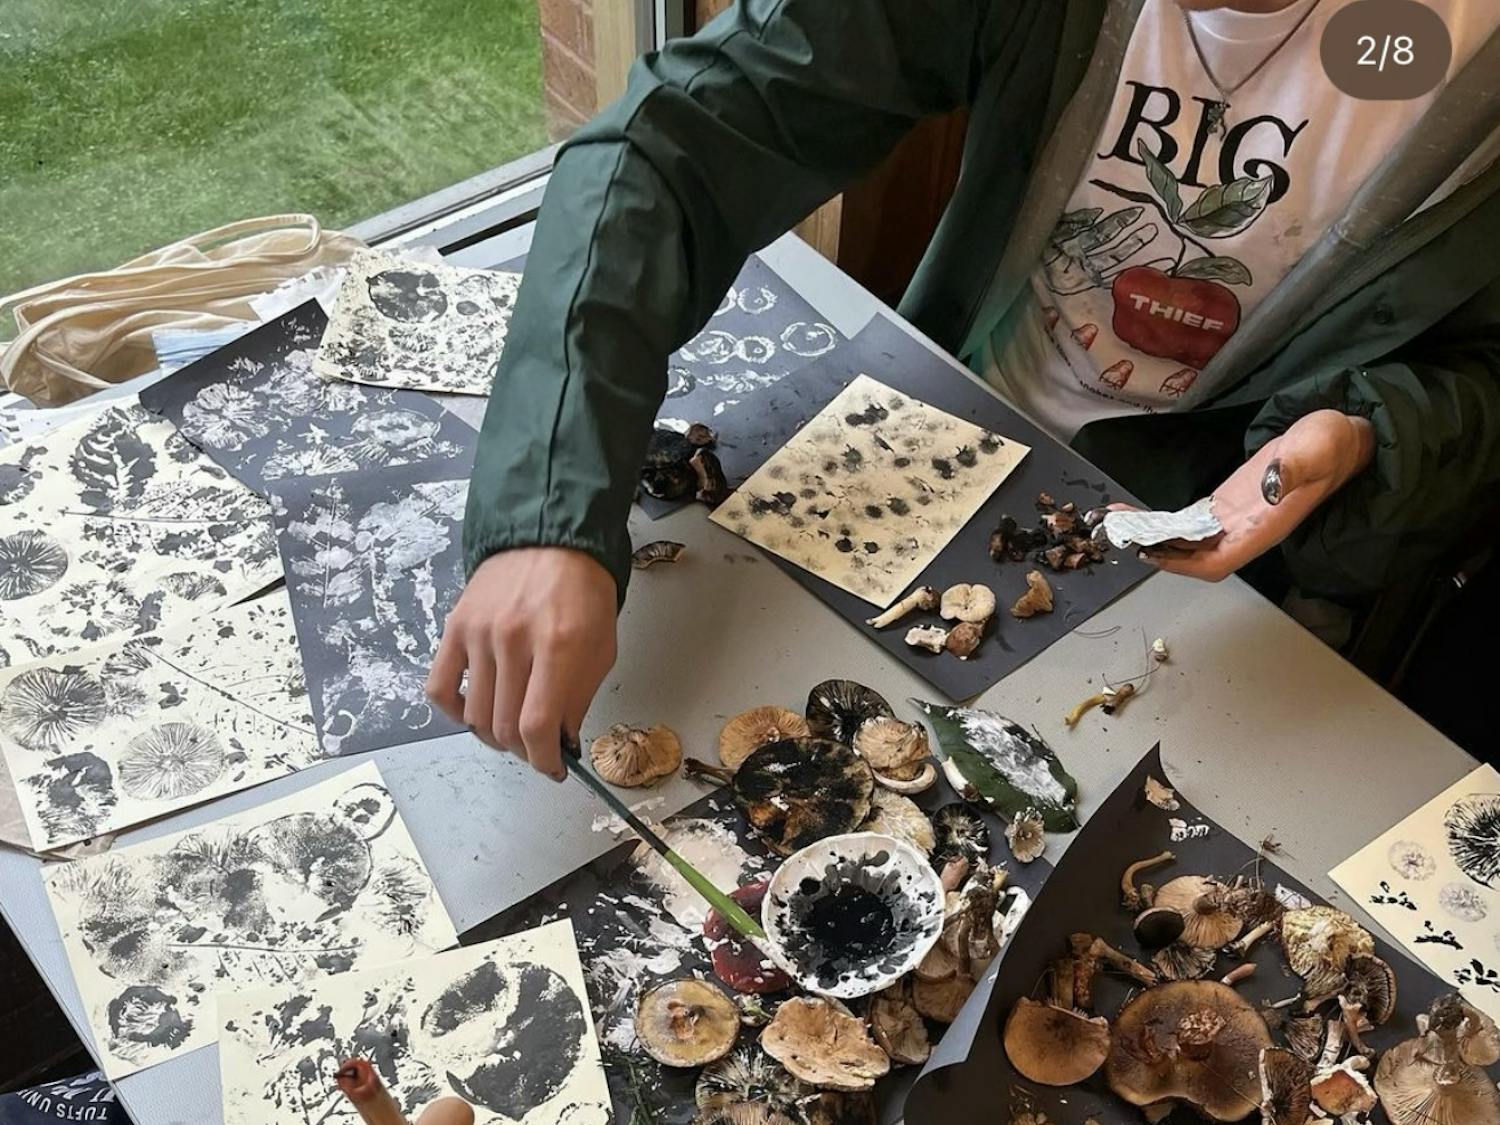 Eco-Art Club members are pictured making spore prints.